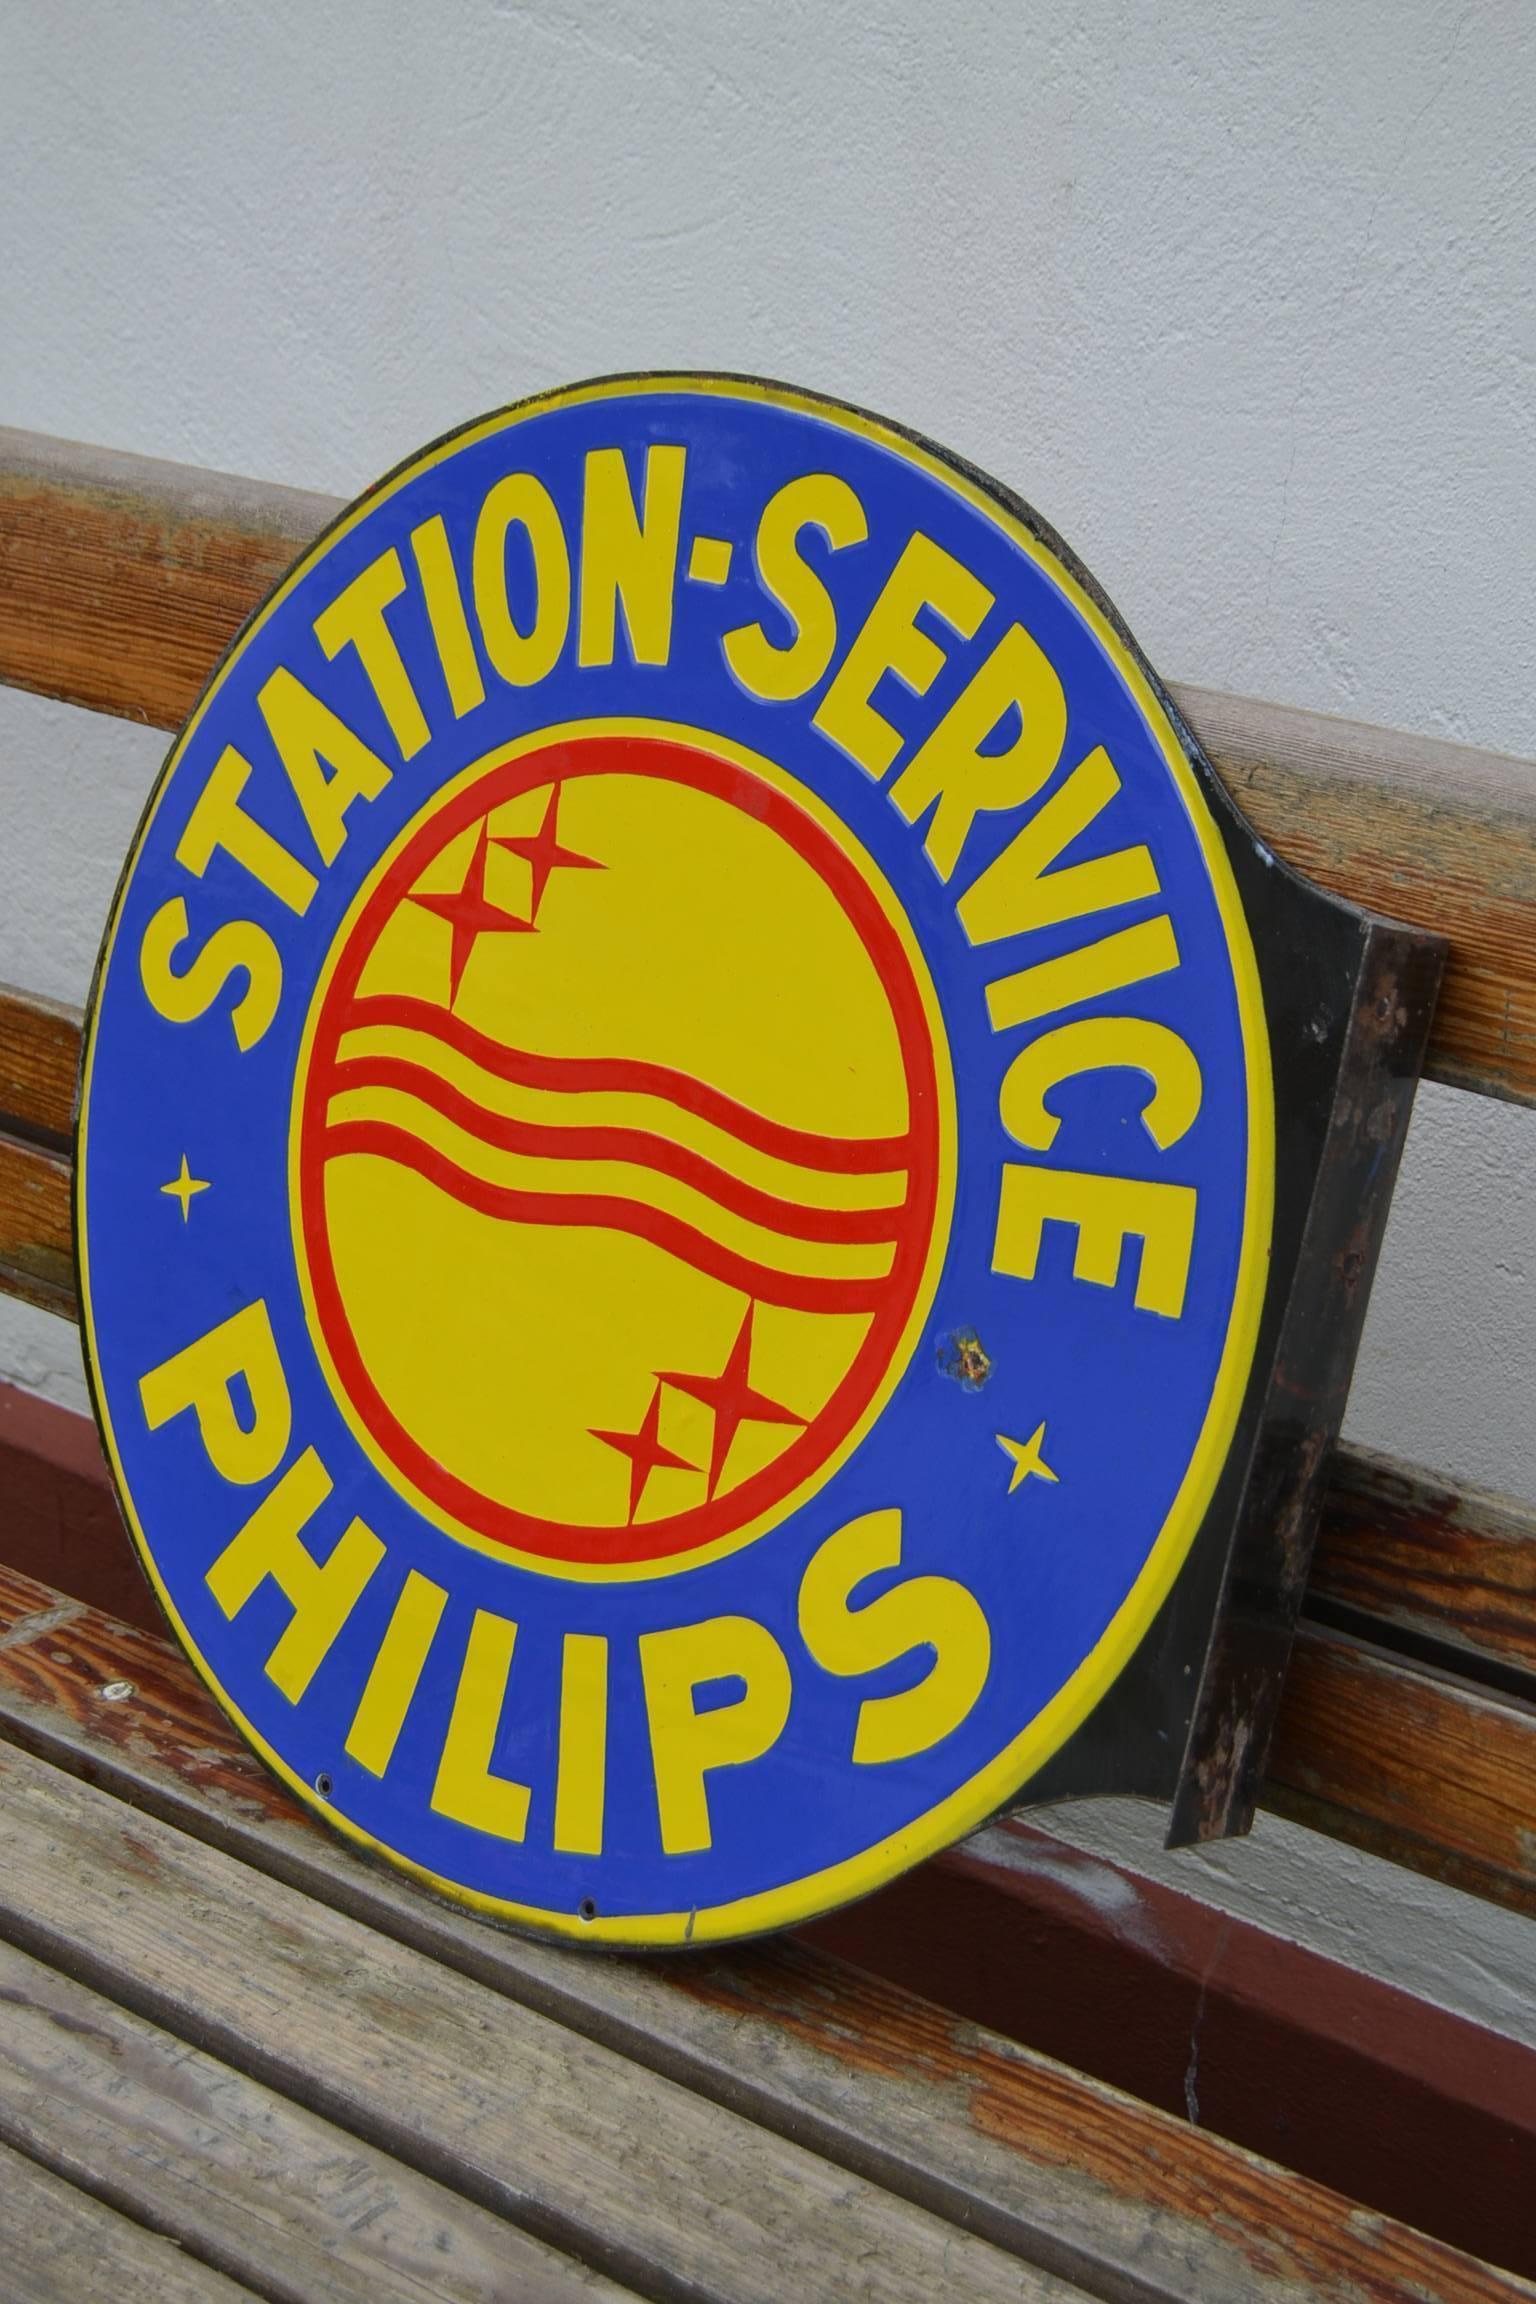 Double-sided vintage enamel advertising display - wall sign - Façade - front sign for Philips Station-Service - Philips Radio 1950s.
Nice round sign with the colors blue, yellow and red.
This porcelain sign can be hung on the wall and be shown and